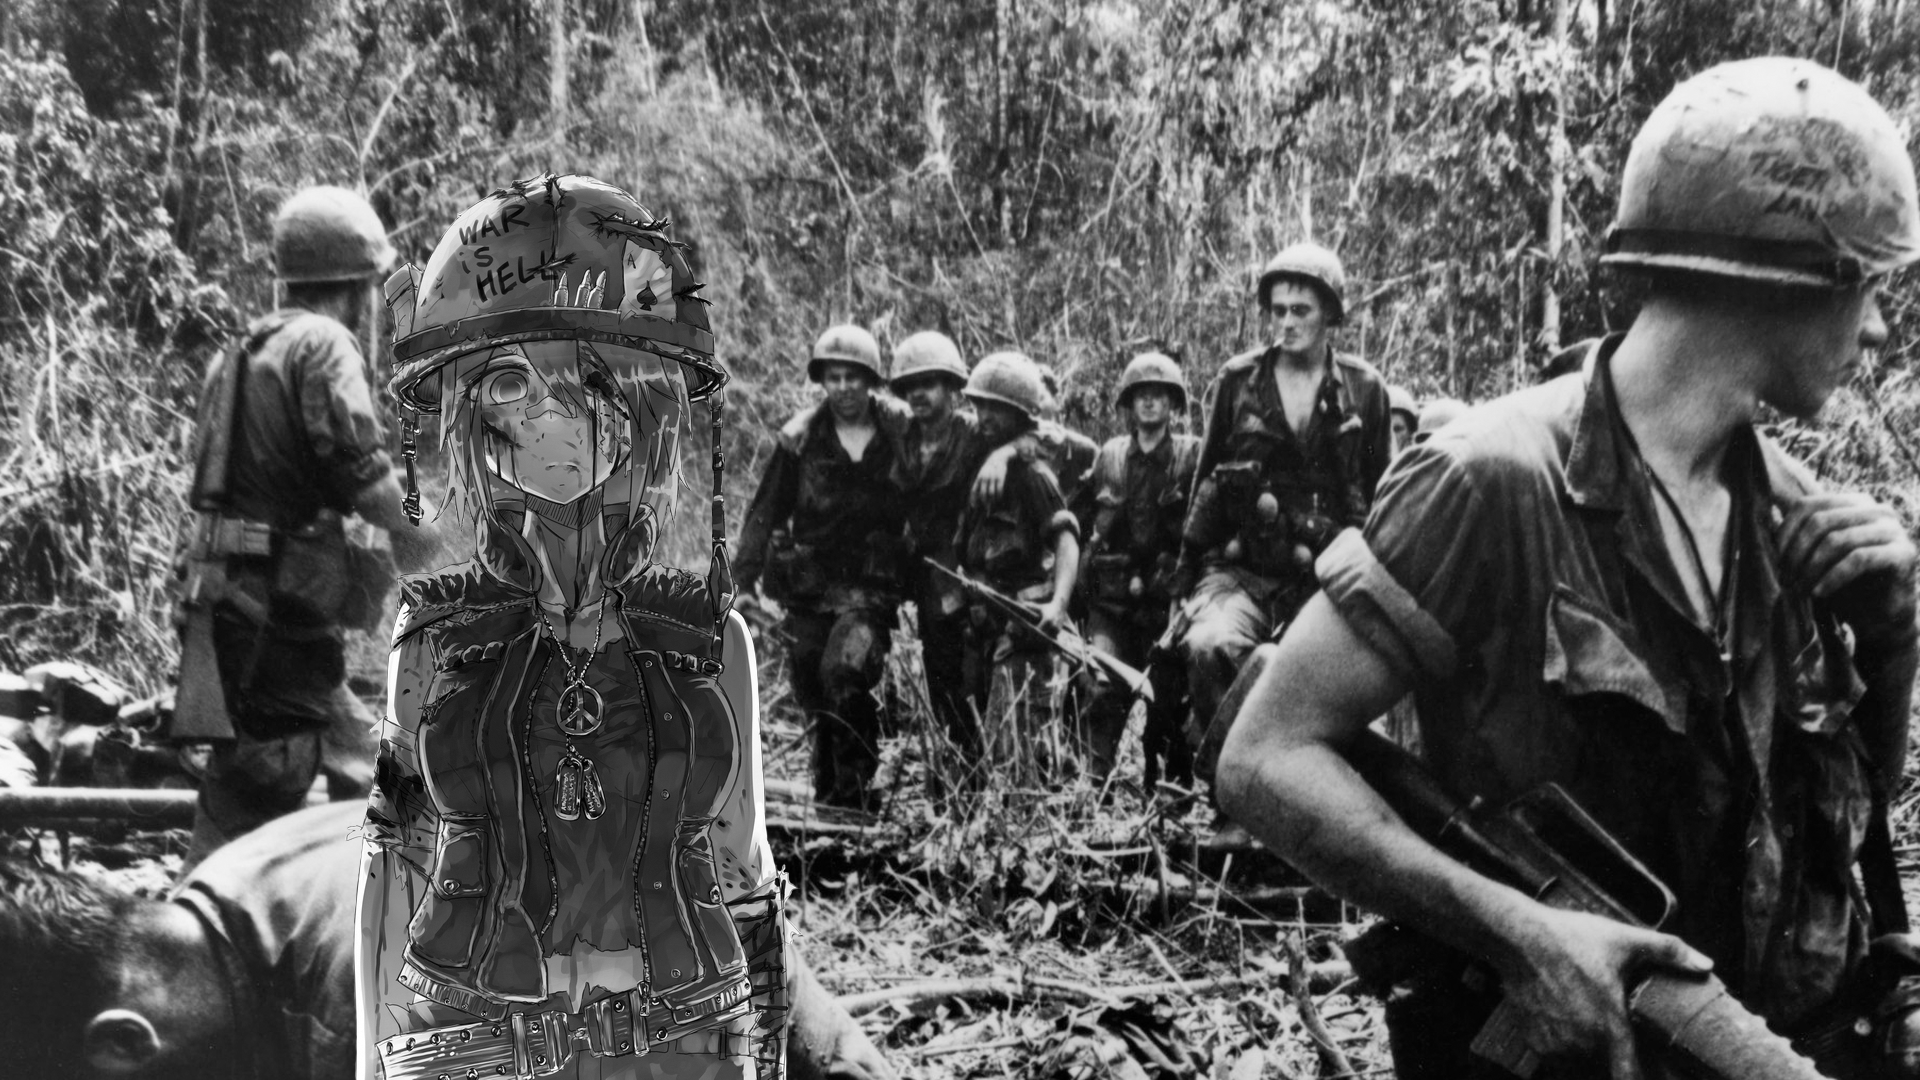 People 1920x1080 war soldier M4A1 anime girls helmet Vietnam War peace dog tag frontal view animeirl monochrome gray photoshopped